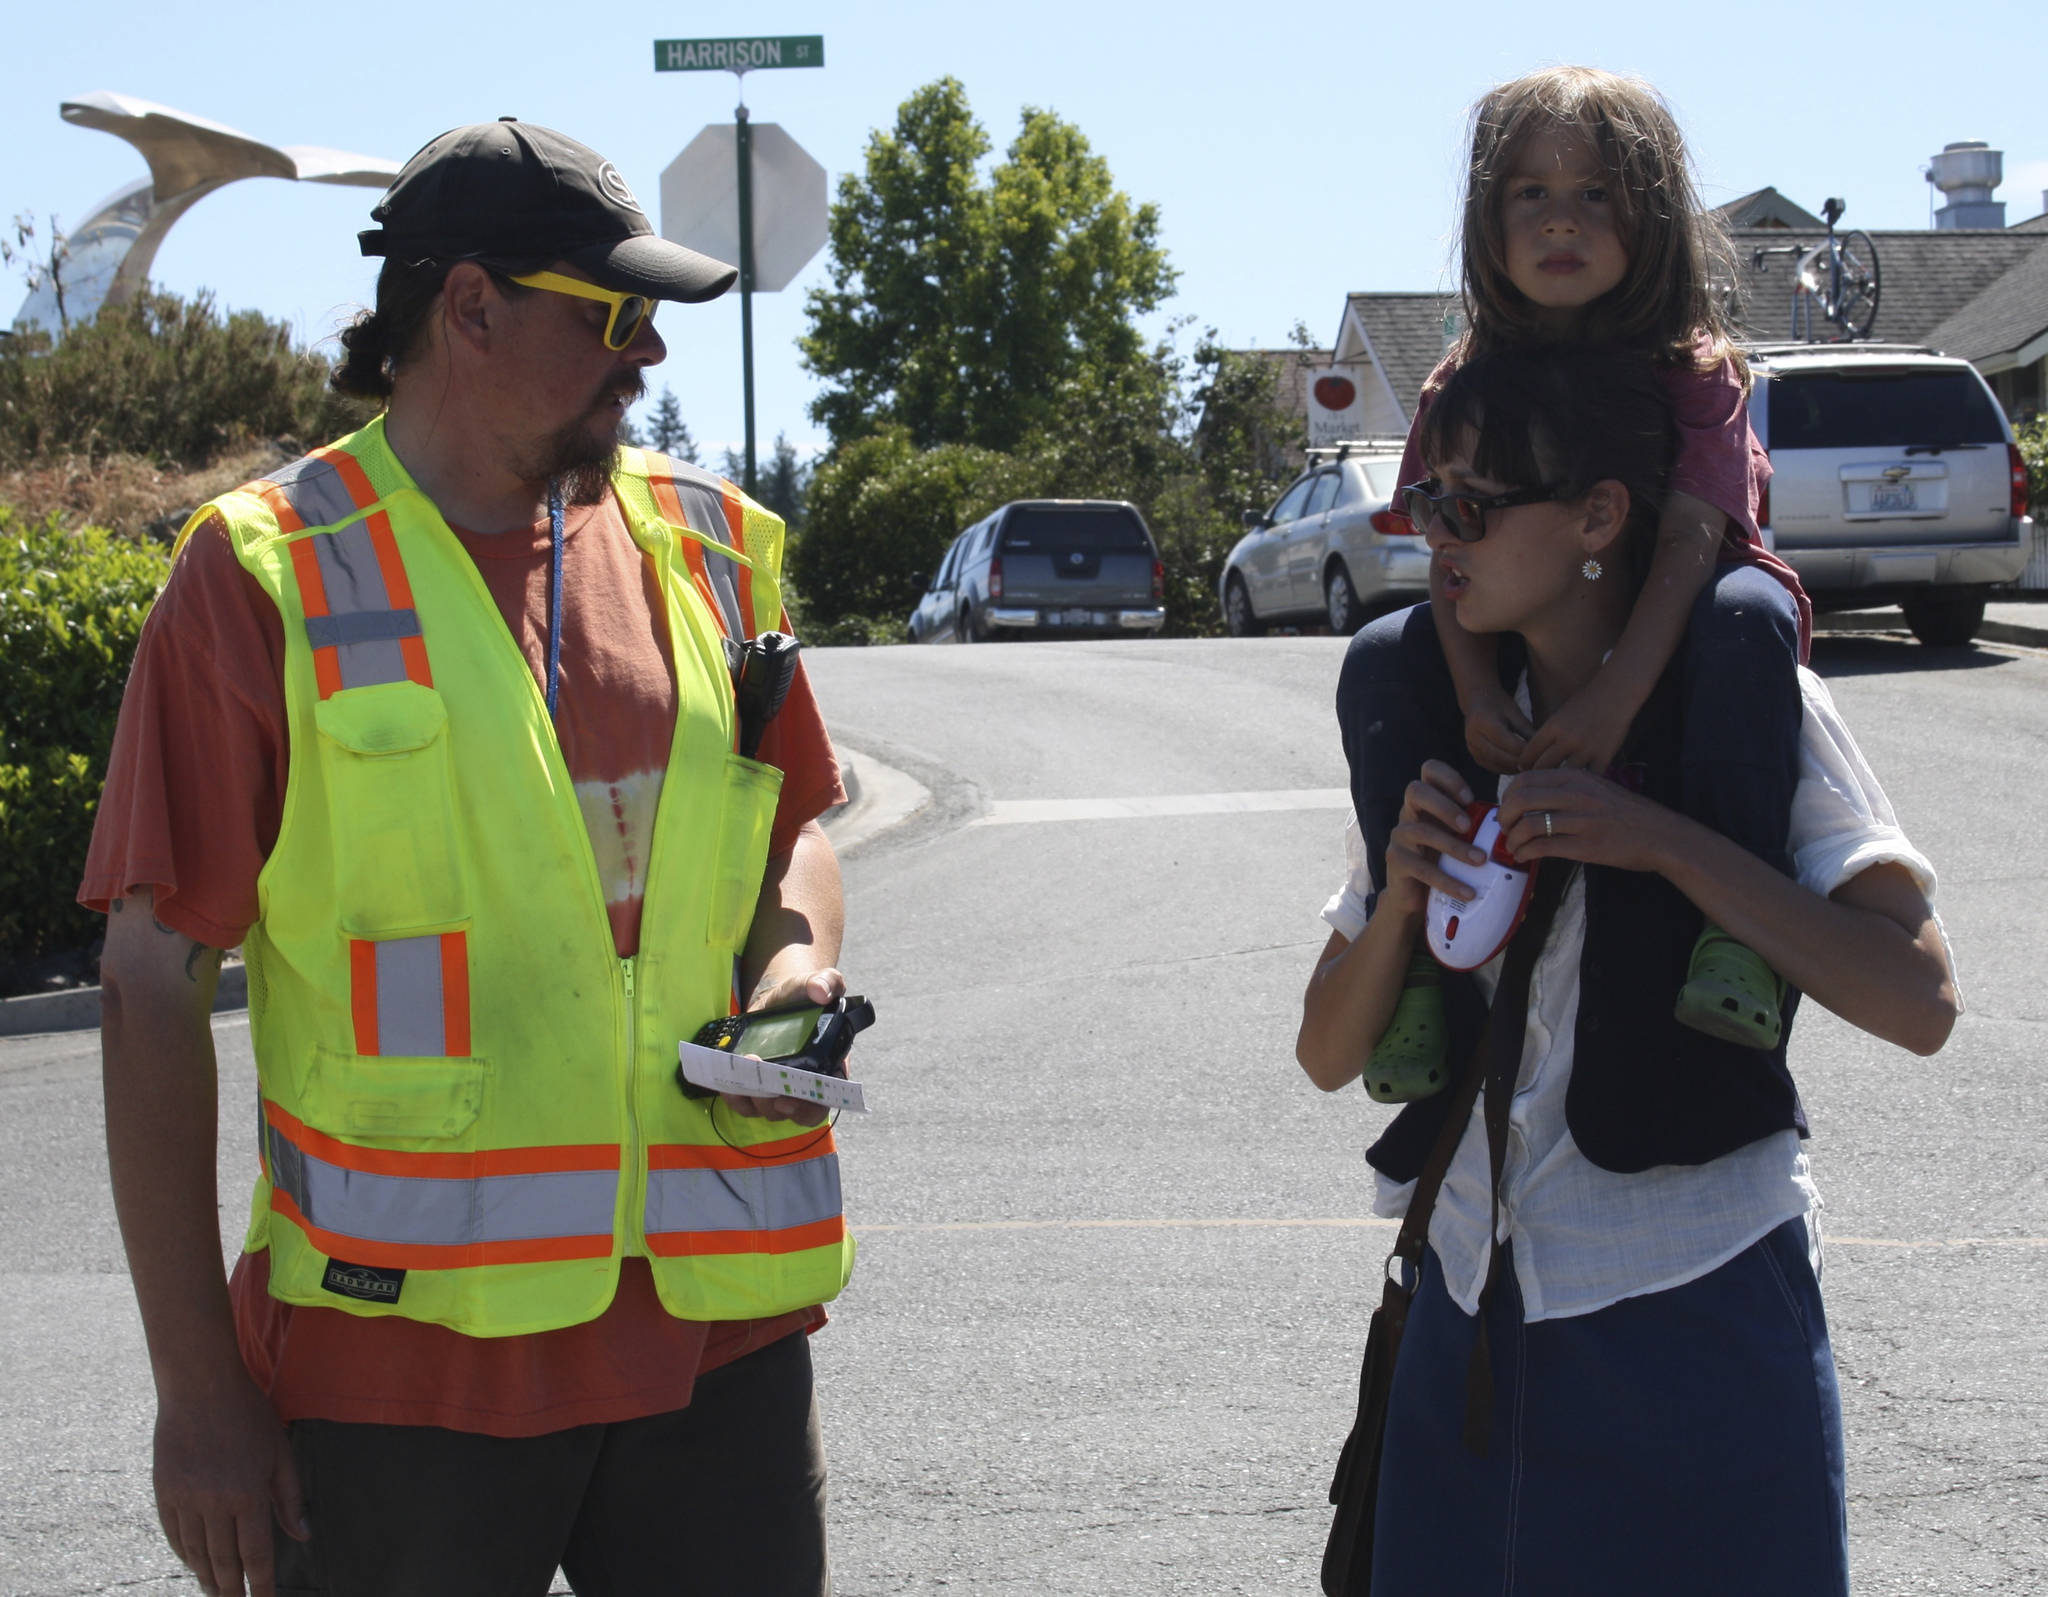 Staff photo/Hayley Day                                Washington State Ferry employee Robert Kyte answers questions about delays at the Friday Harbor terminal on Tuesday, July 18.